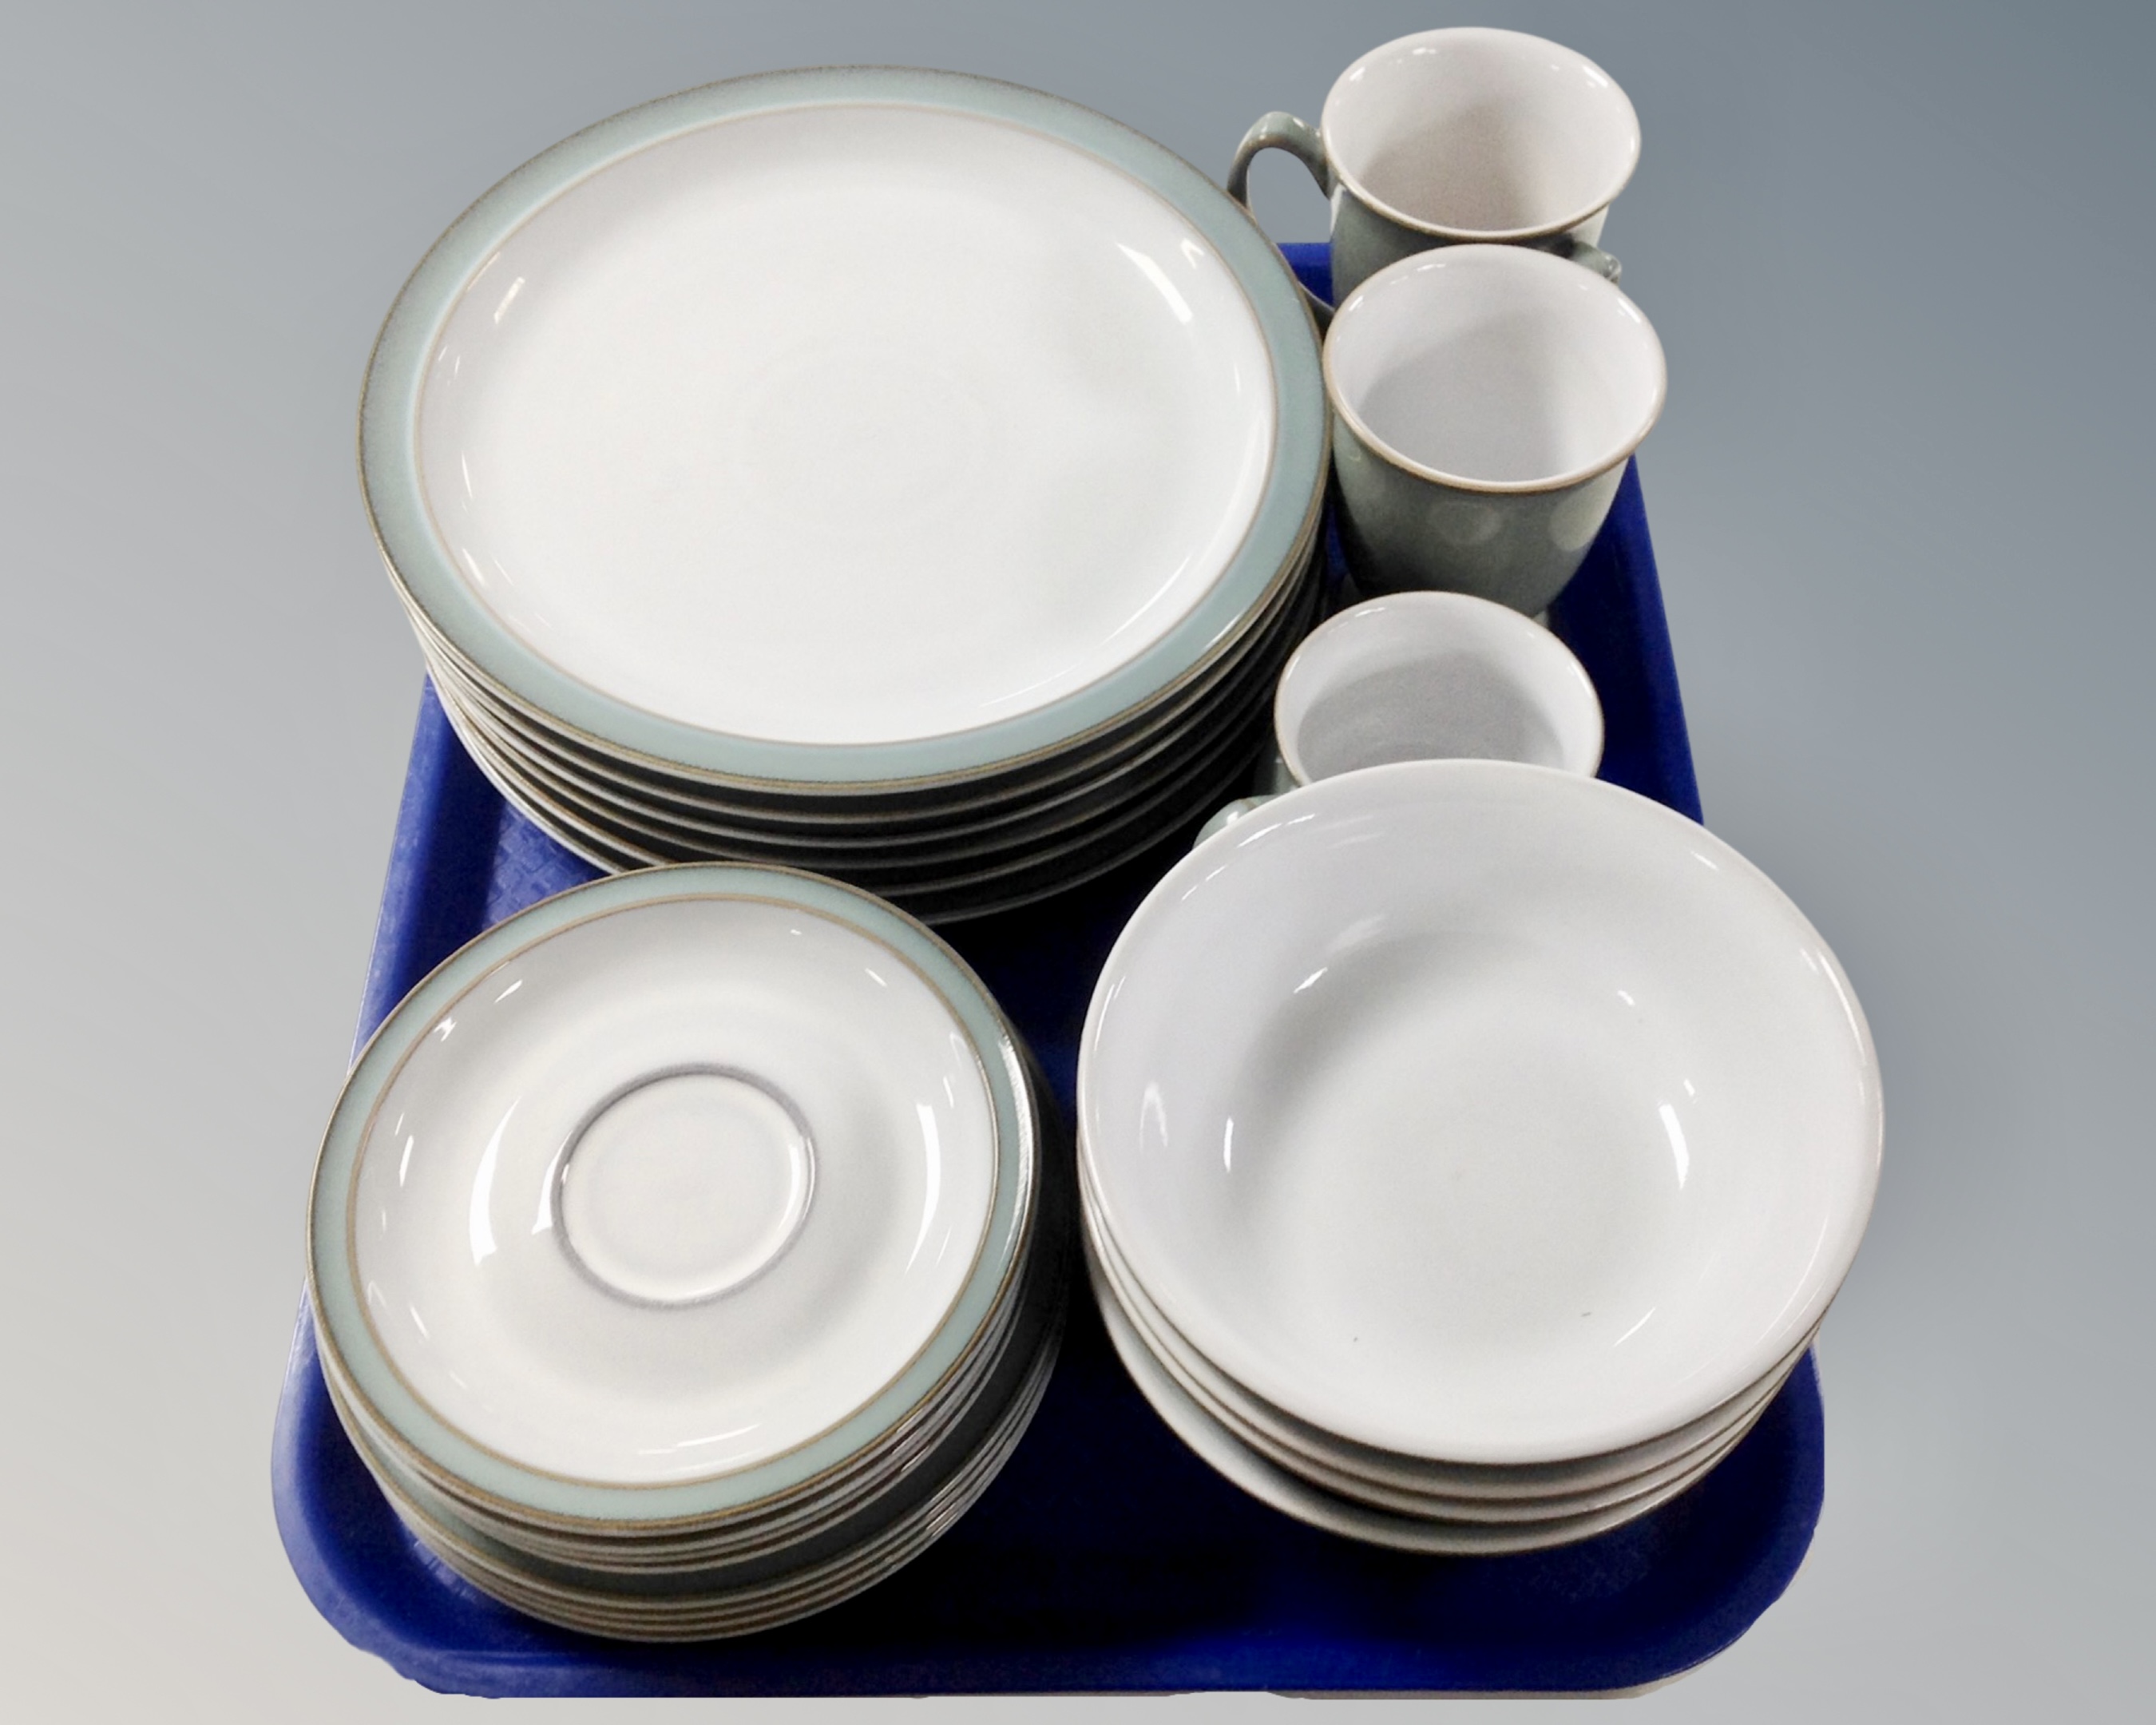 A collection of 21 pieces of Denby pottery dinnerware.